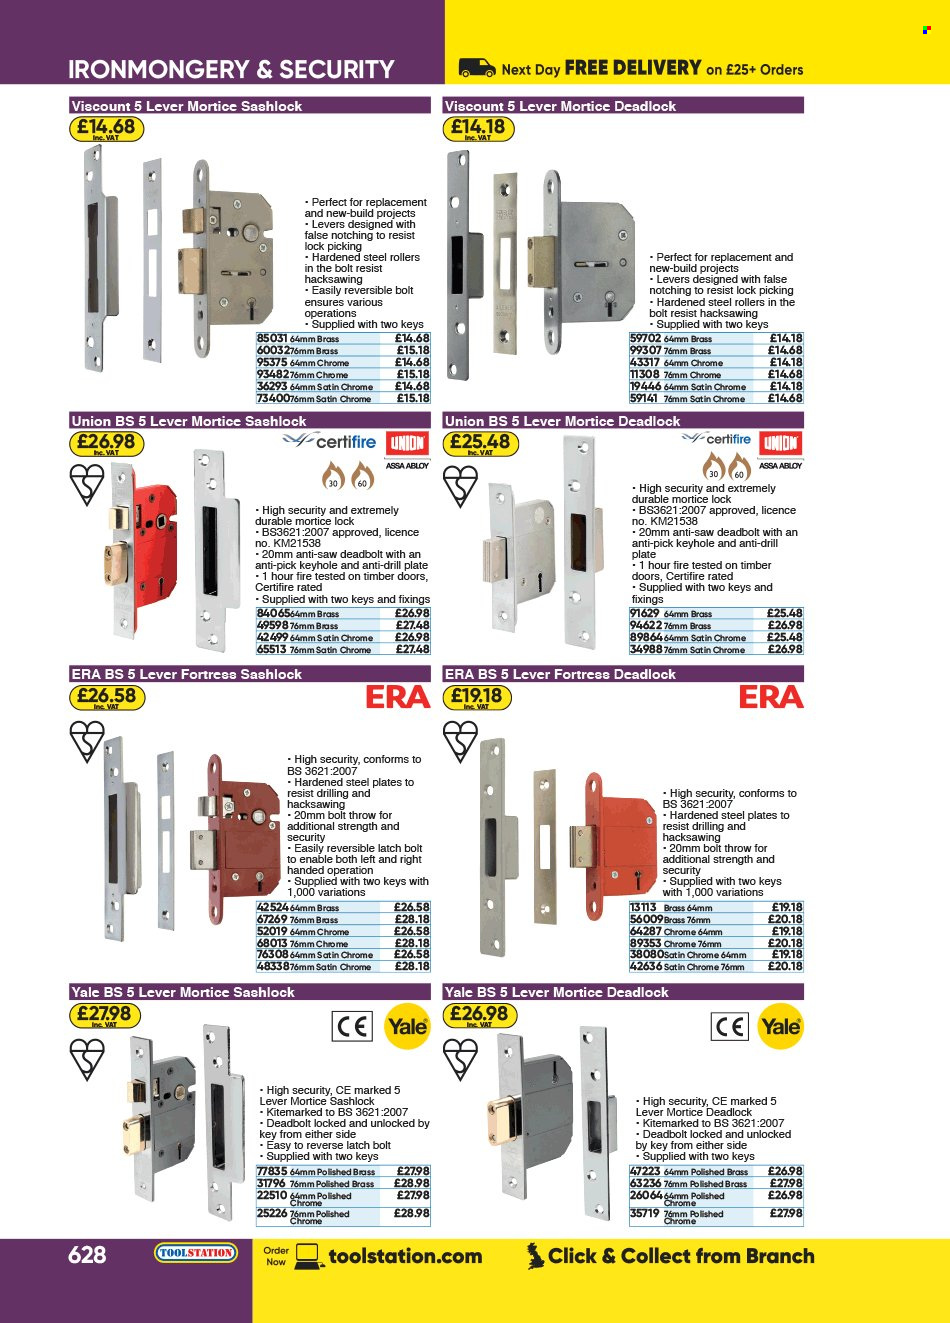 Toolstation offer . Page 628.